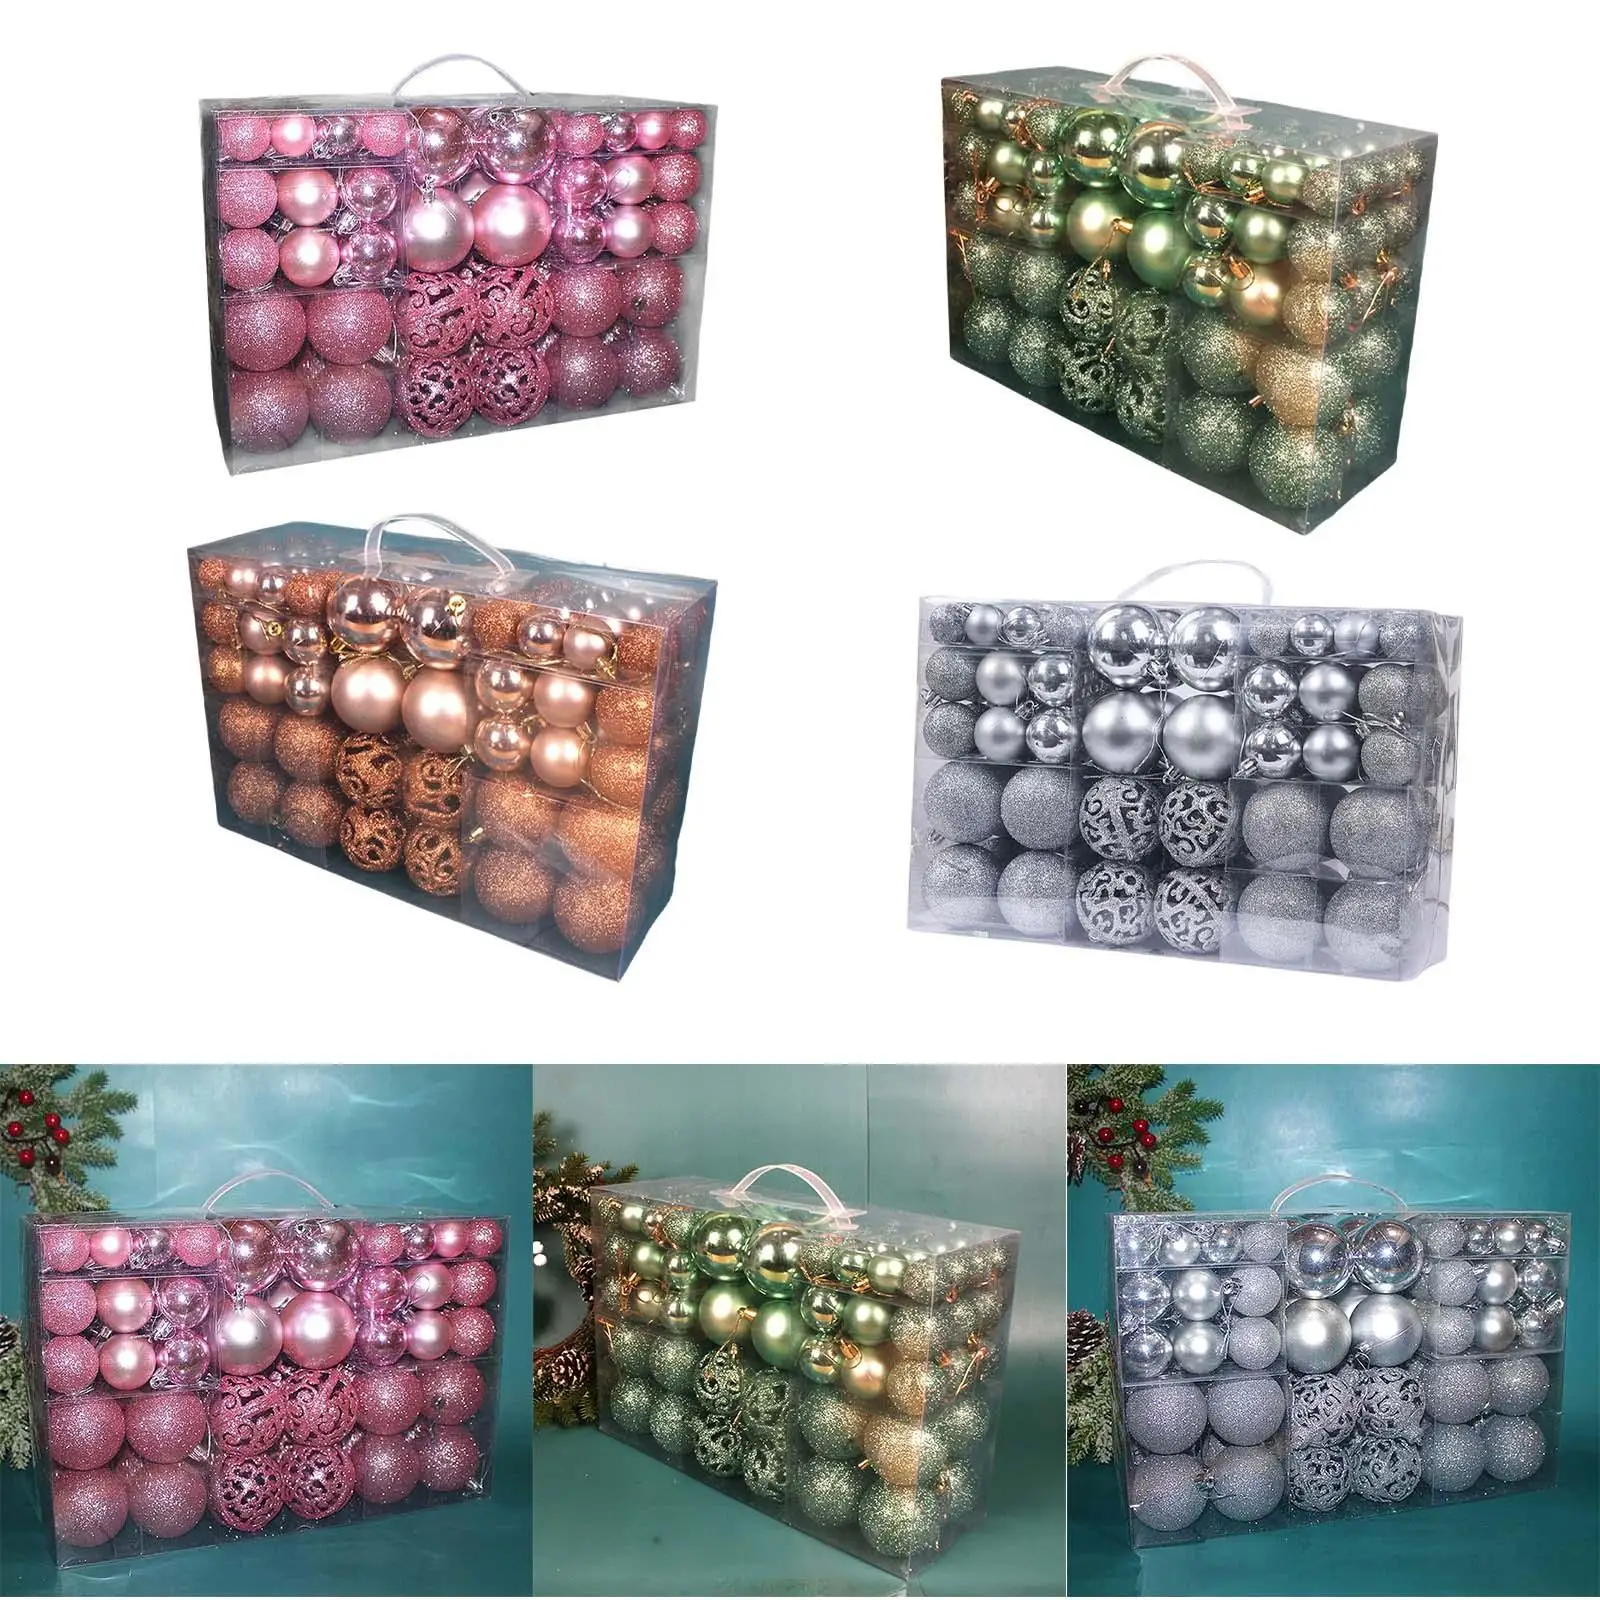 100Pcs Christmas Tree Ornaments Hanging Balls Baubles Xmas Tree Decorations with Lanyard for Indoor Holiday Decoration